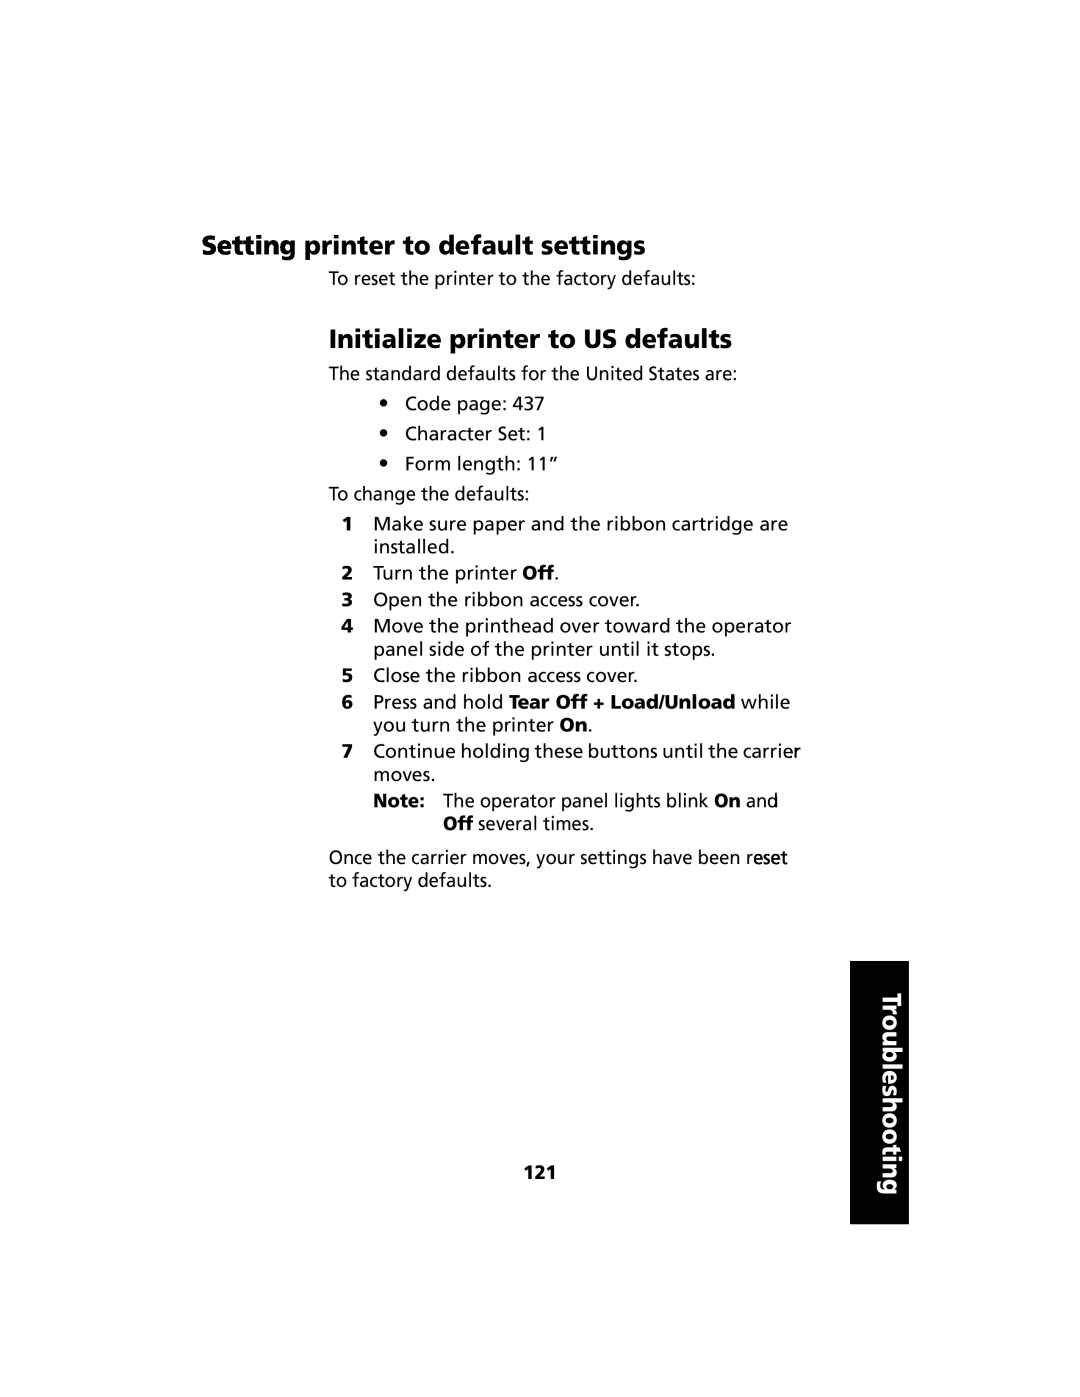 Lexmark 2480 manual Setting printer to default settings, Initialize printer to US defaults, Troubleshooting 